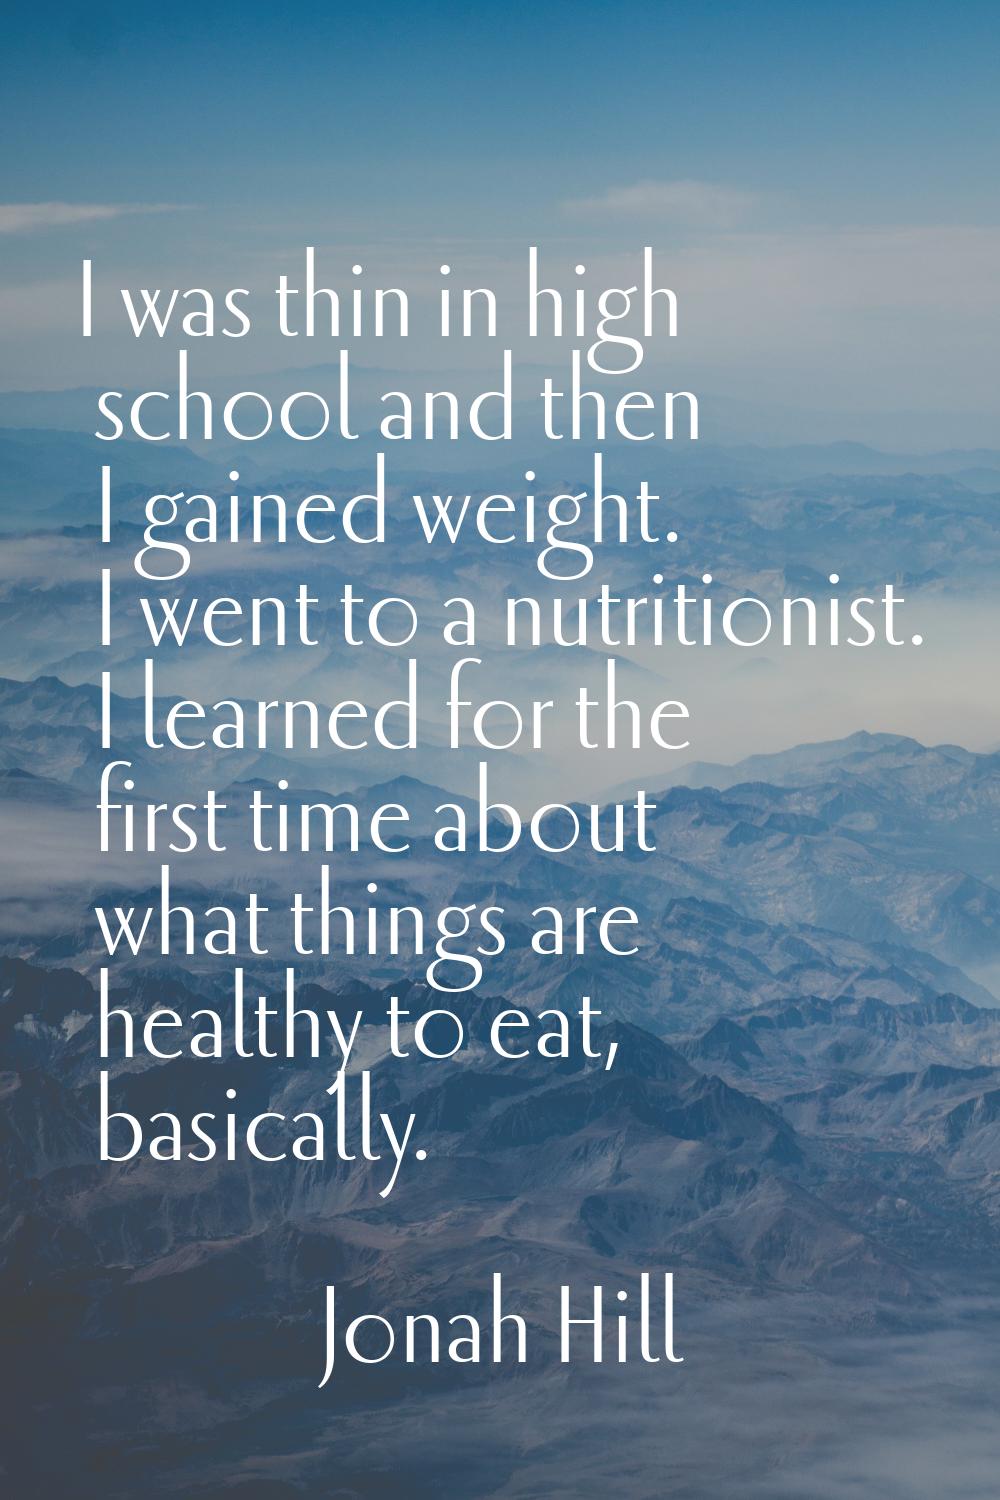 I was thin in high school and then I gained weight. I went to a nutritionist. I learned for the fir